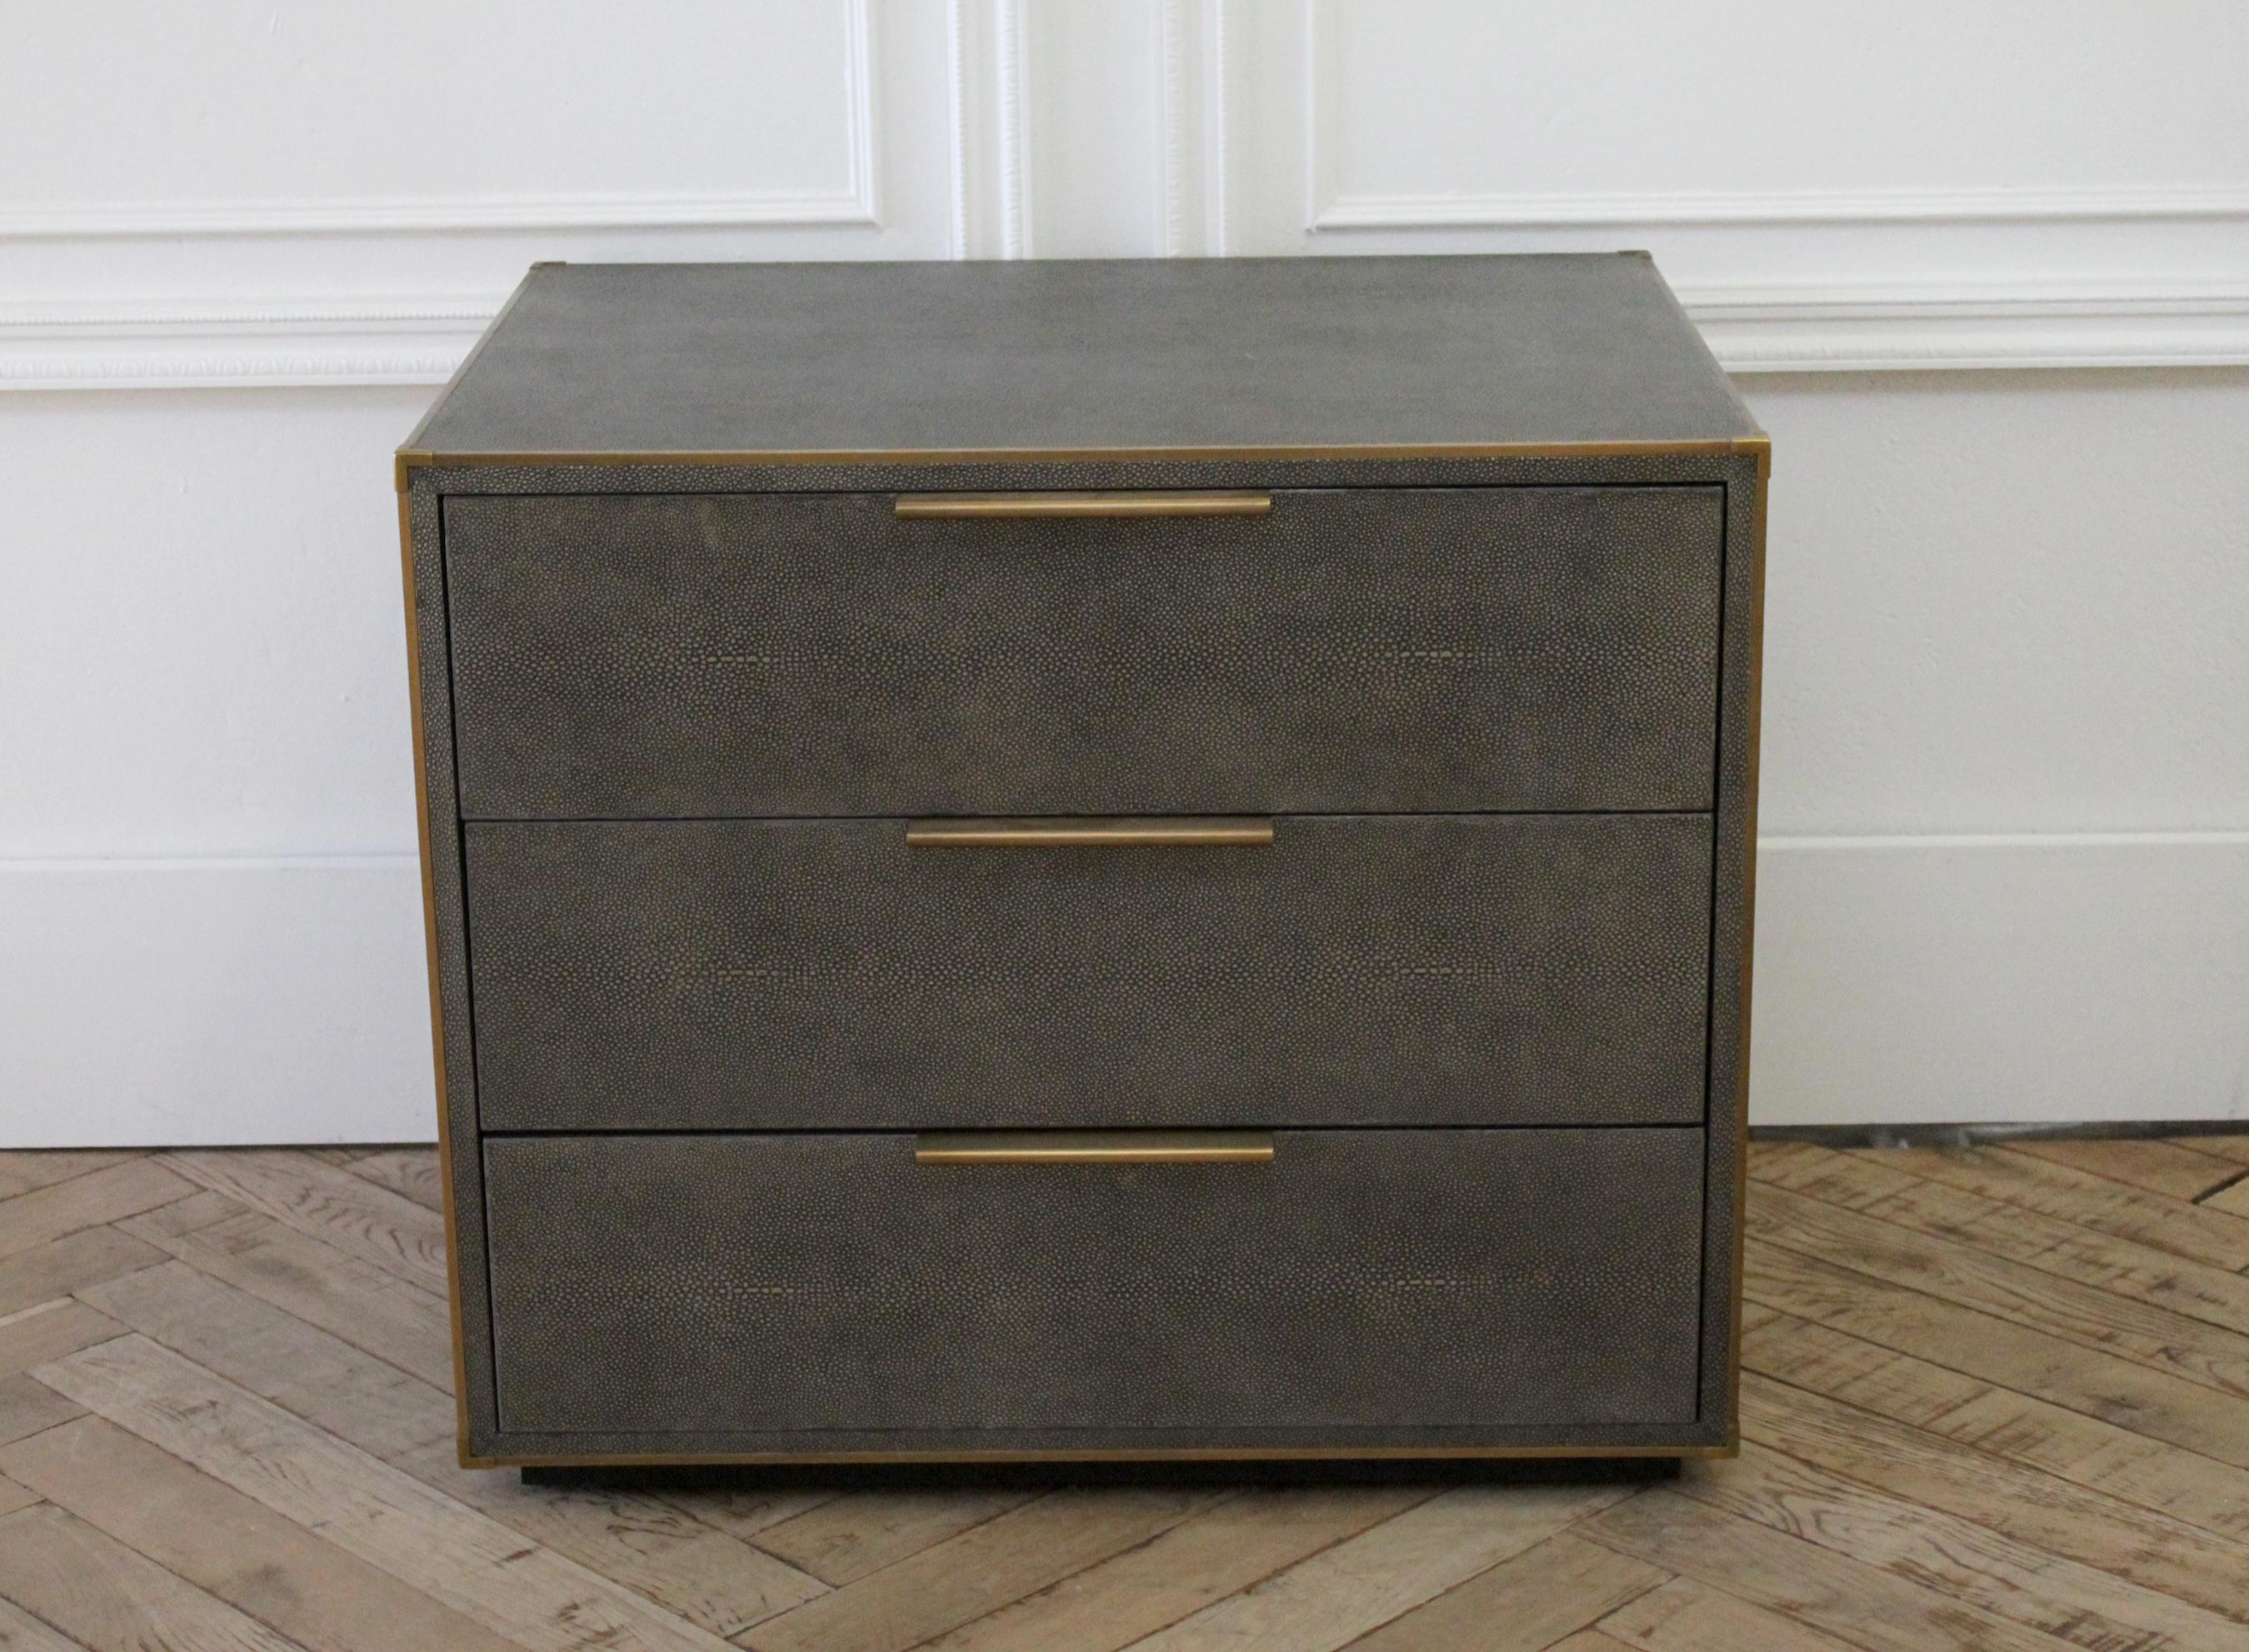 Saunderson shagreen closed nightstand by Restoration Hardware

A 1970s interpretation of French Art Deco design, our bedroom collection from the Van Thiels celebrates the marriage of two eras. With elegant materials and a refined form, it's clad